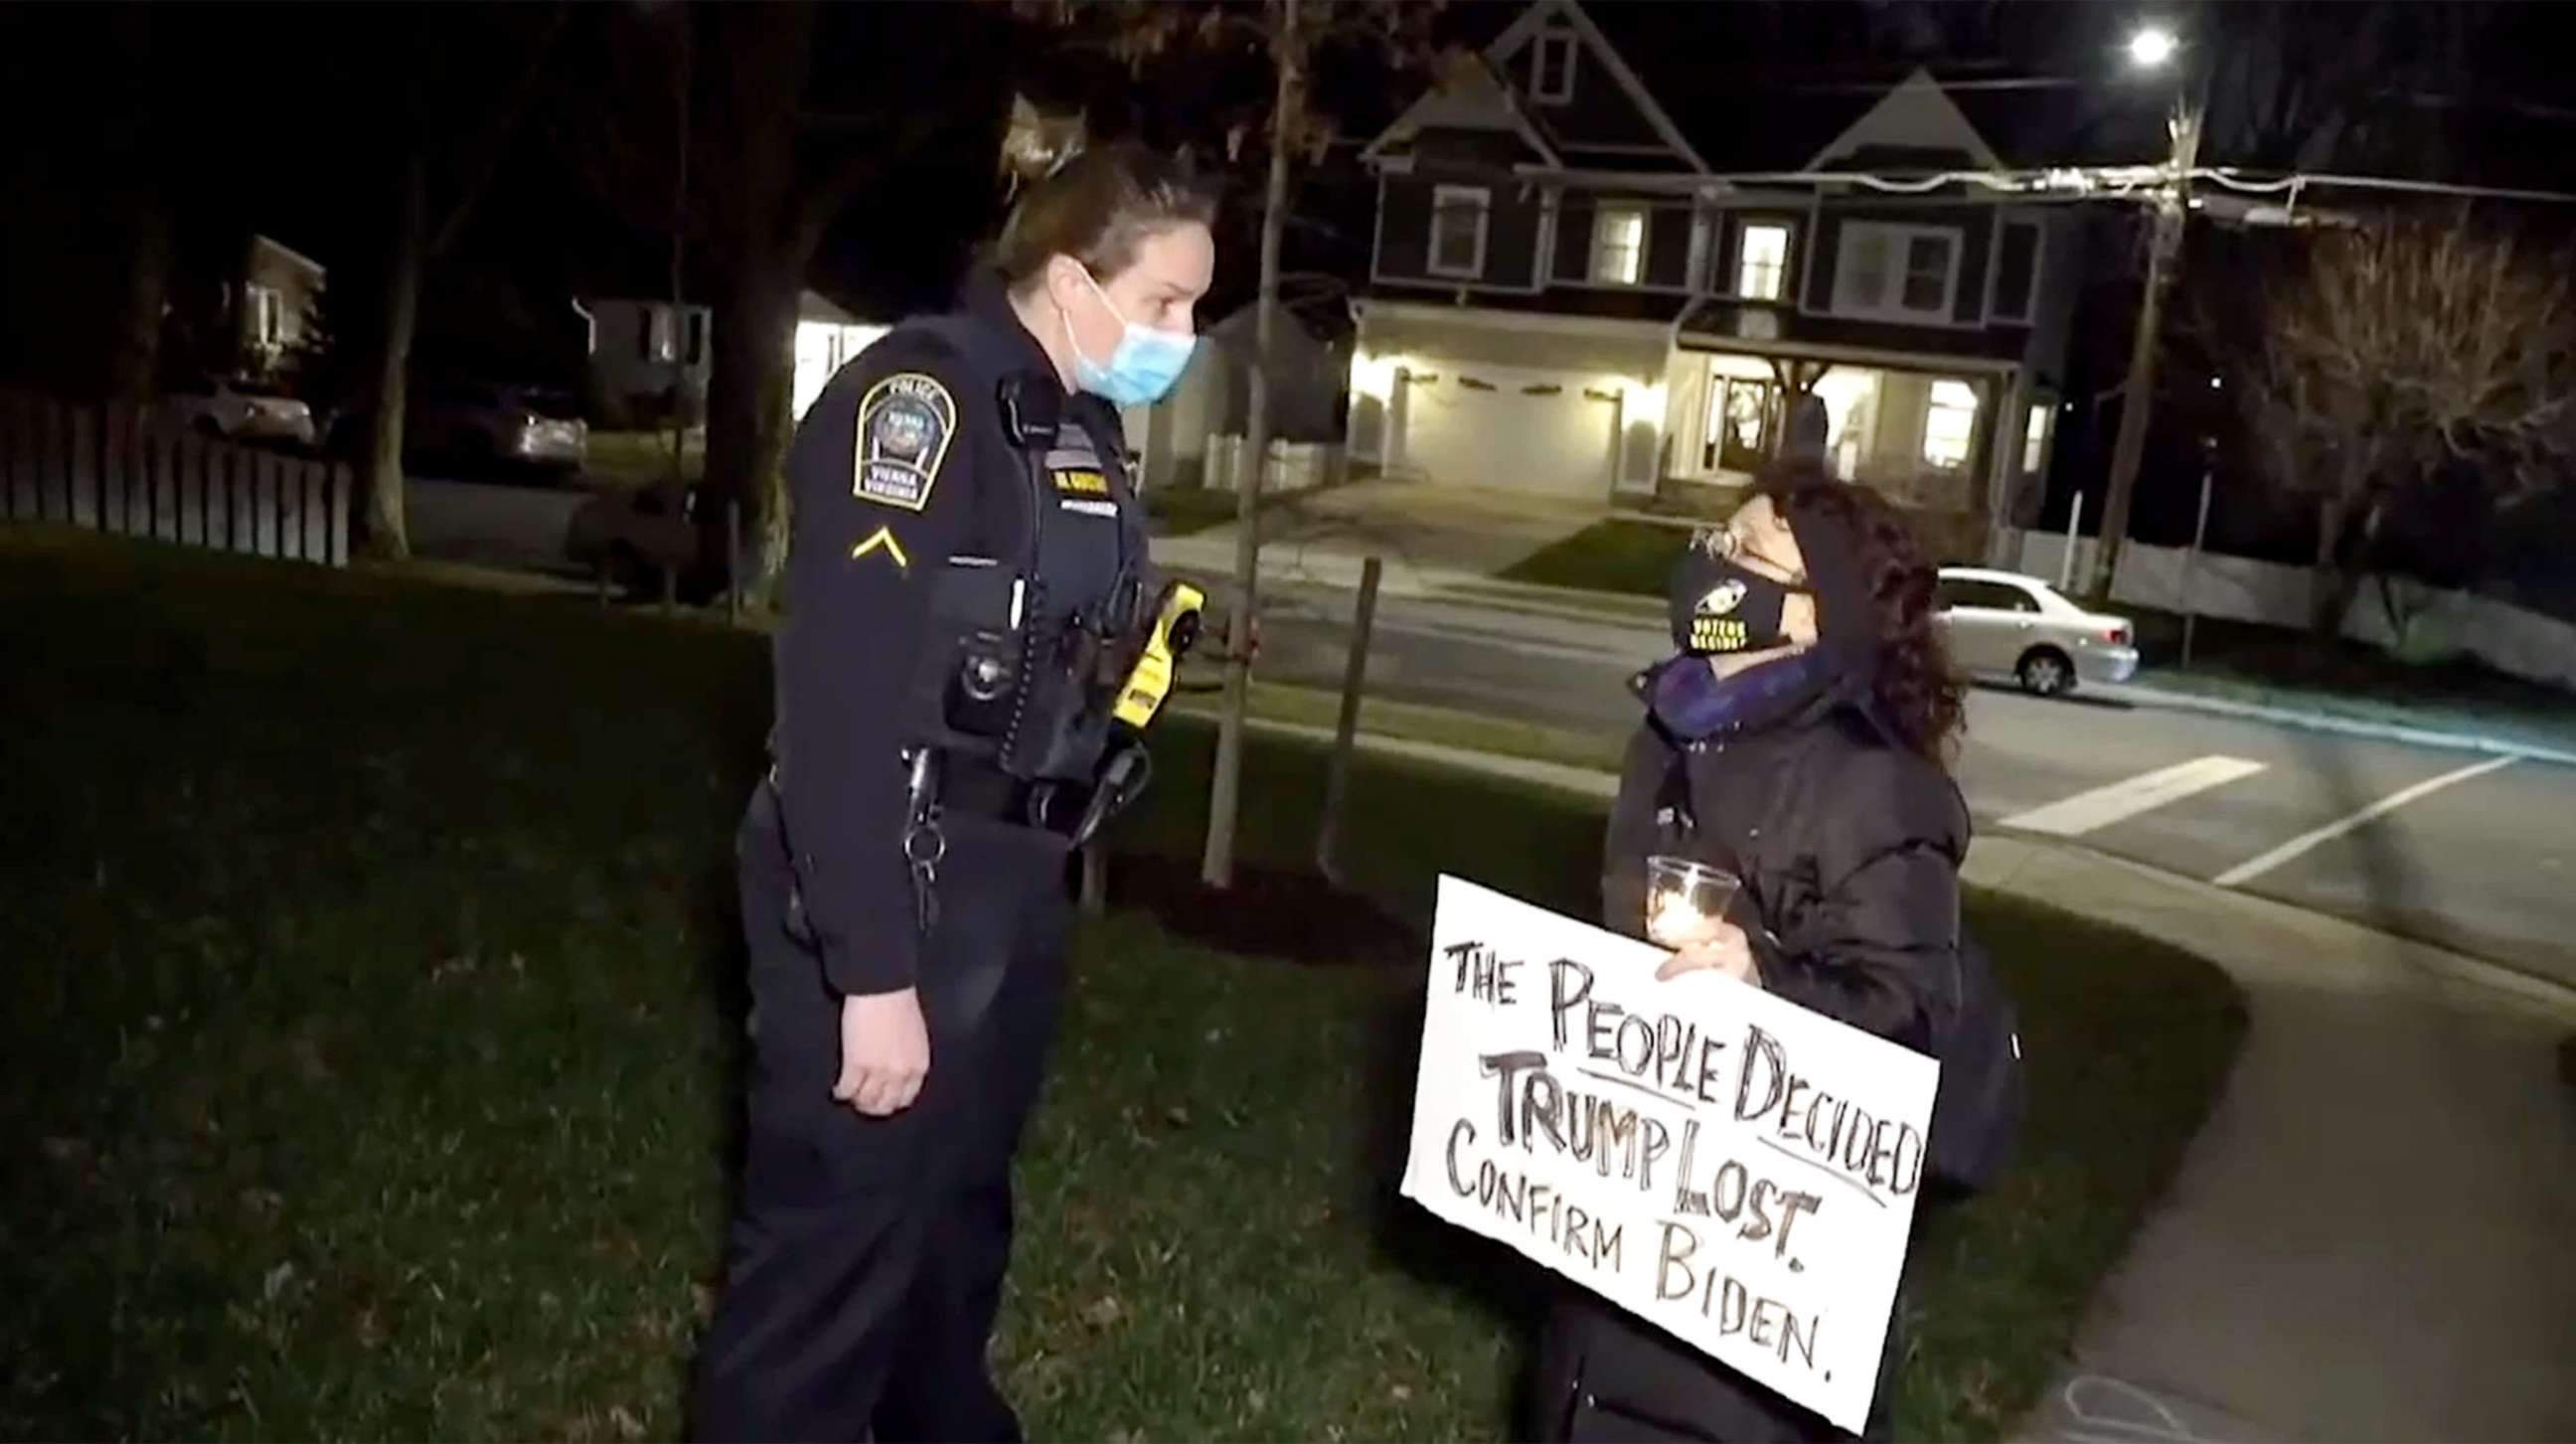 PHOTO: A police officer speaks to an activist from ShutDownDC as the group staged a demonstration holding candles and signs while chanthing slogans outside the northern Virginia home of U.S. Sen. Josh Hawley, Jan. 4, 2021.